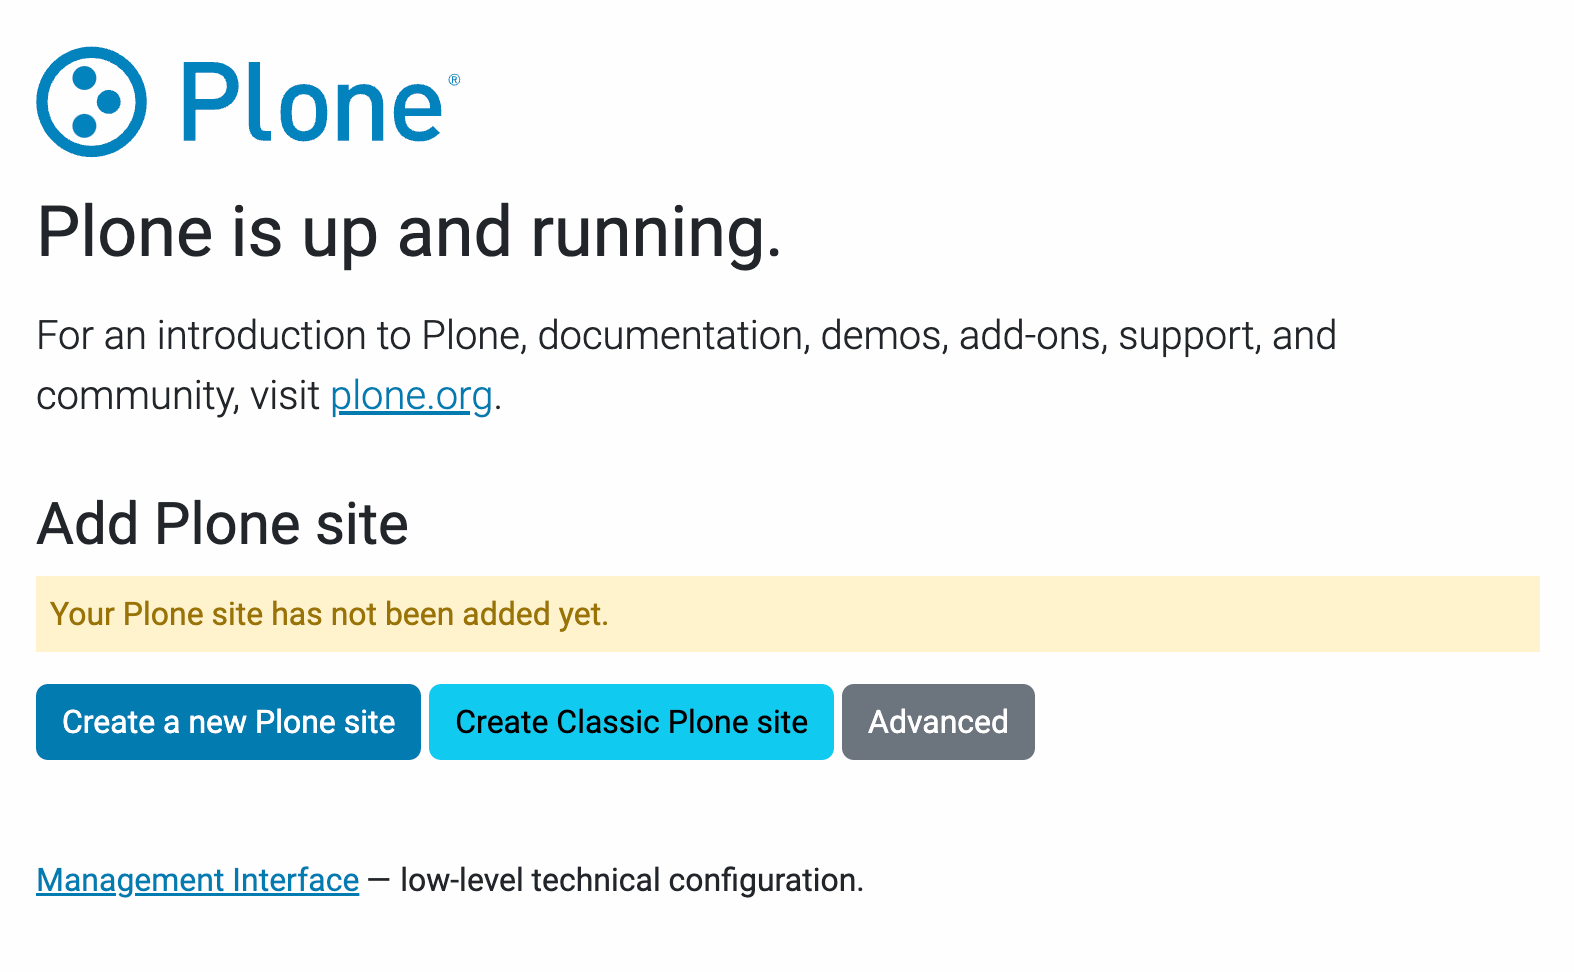 Zope instance is up and running, ready to create a Plone instance.